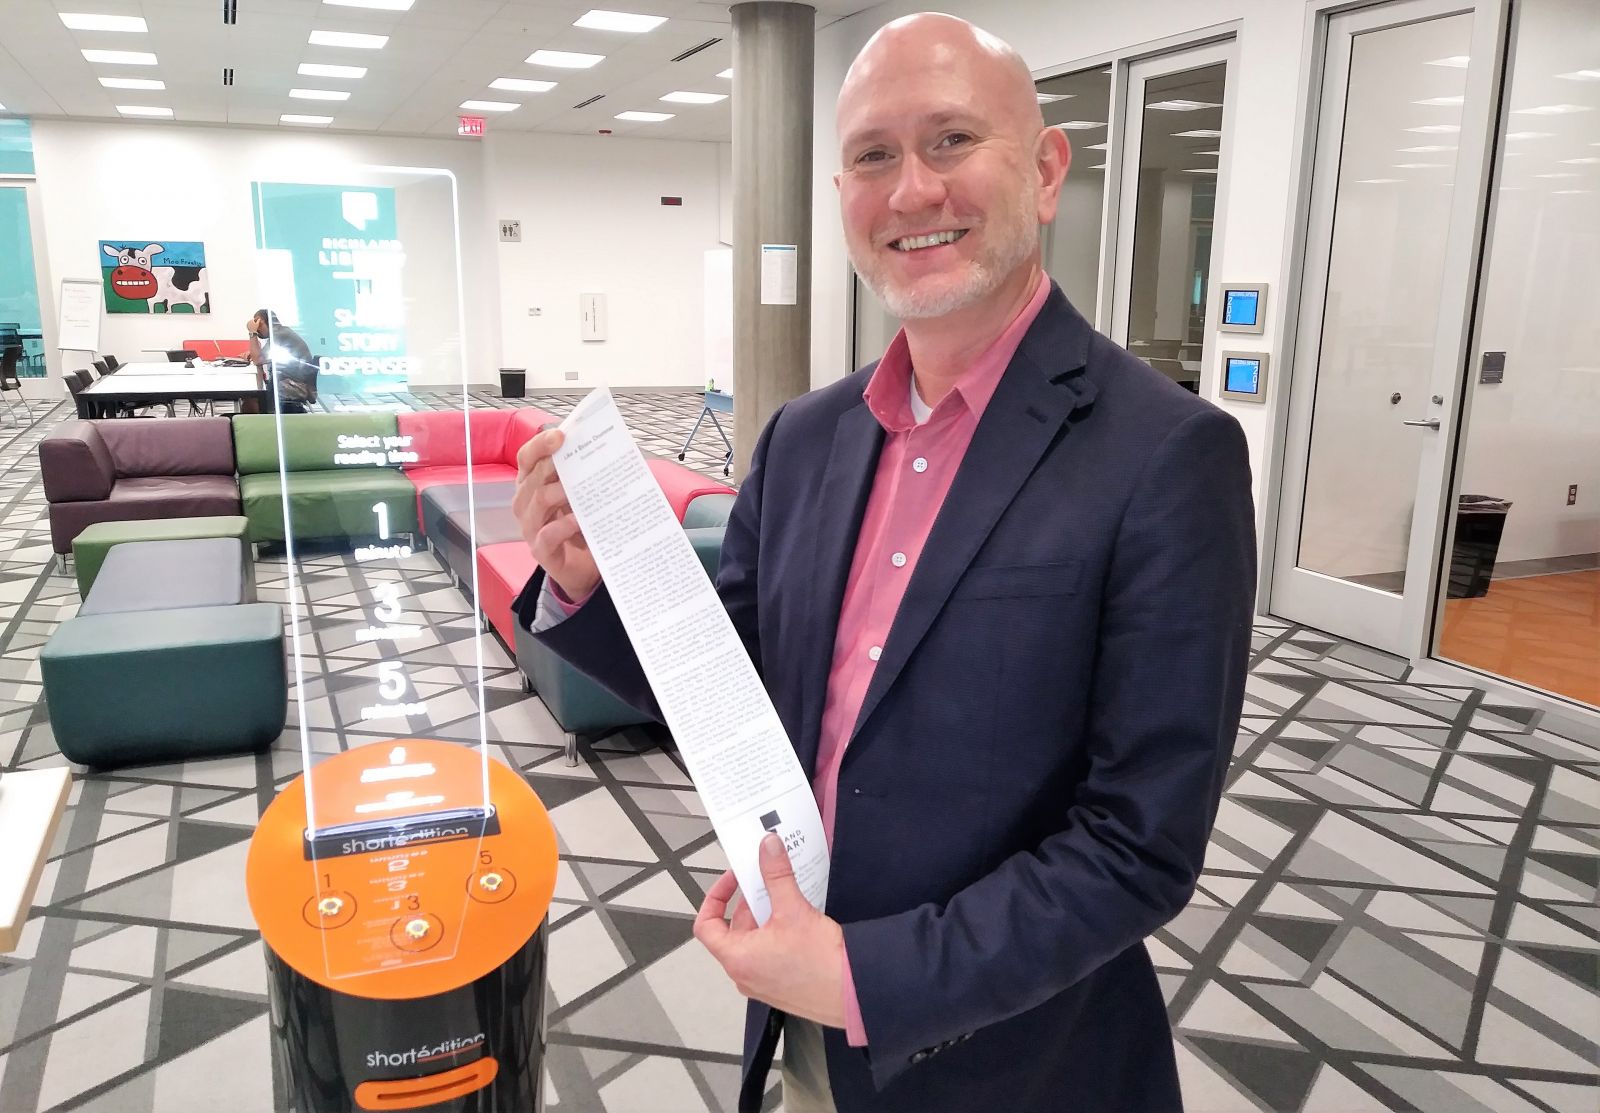 Tony Tallent, chief program and innovation officer at Richland Library, with the spoils from a short story dispenser.  (Photo/Travis Boland)